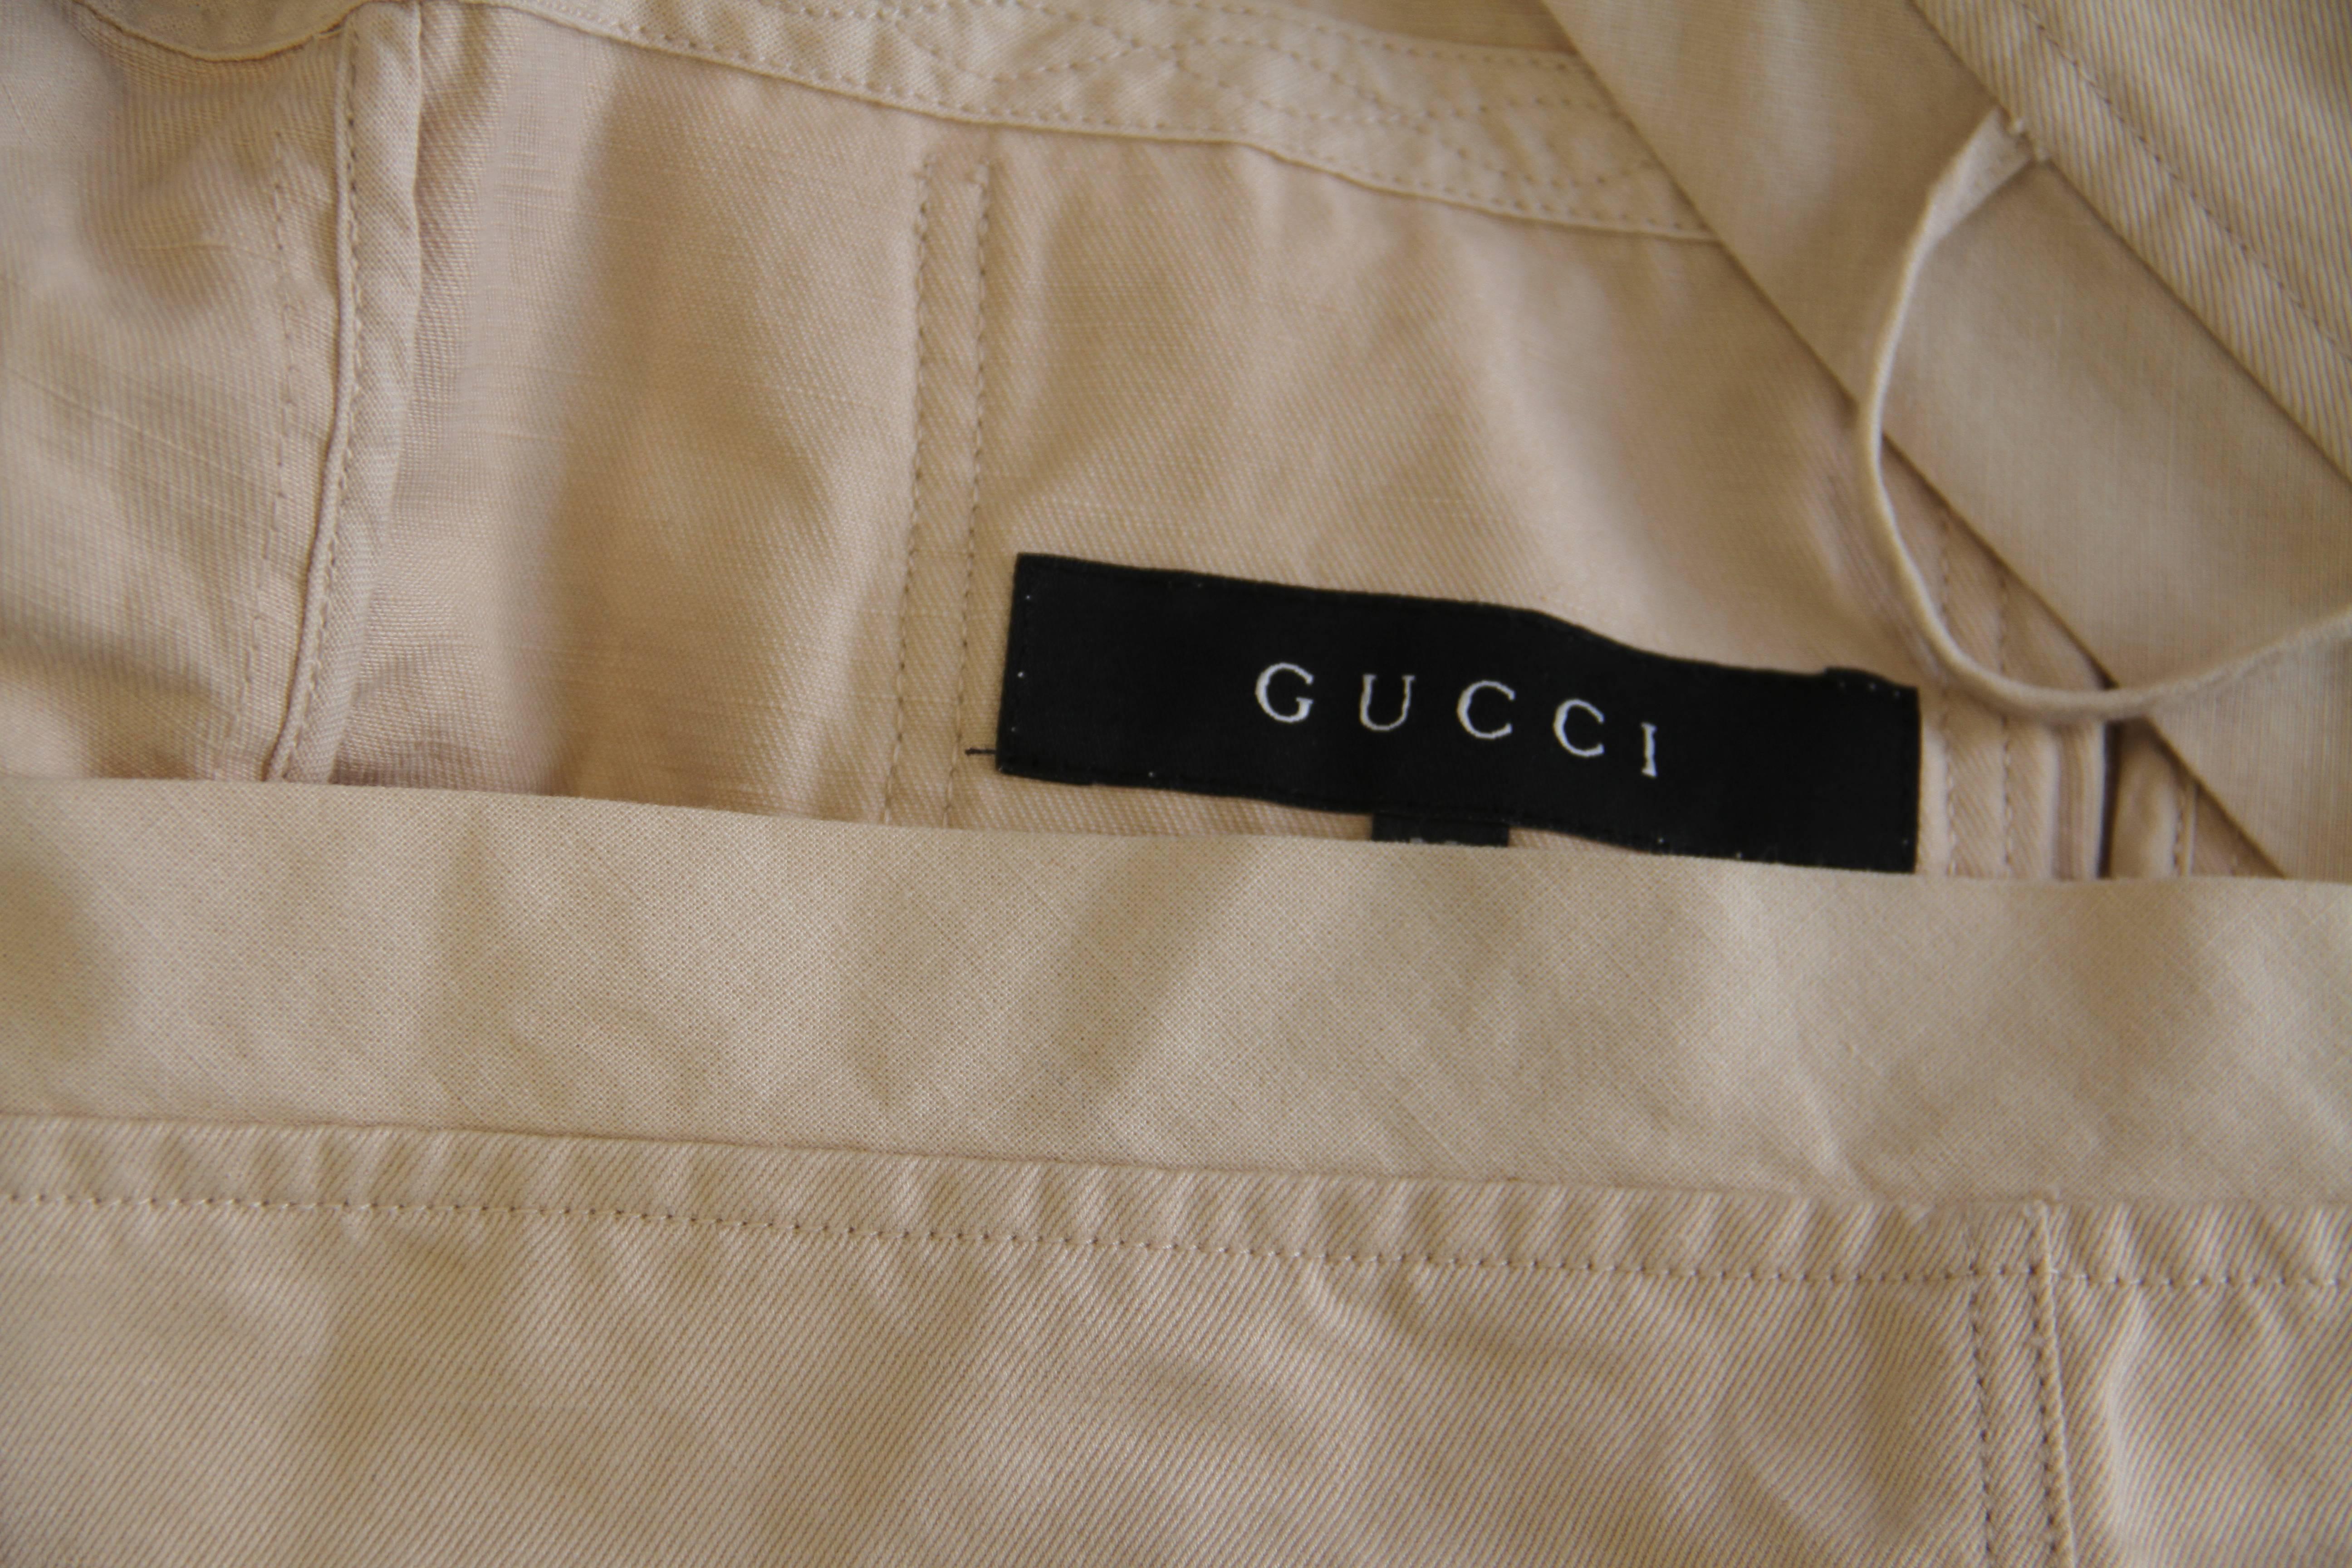 Tom Ford For Gucci cotton and linen jacket from the Spring 2002 collection.

Marked an Italian size 38.

Manufacturer - Zamasport S.p.a.

Fabric content - 58% cotton / 42% linen